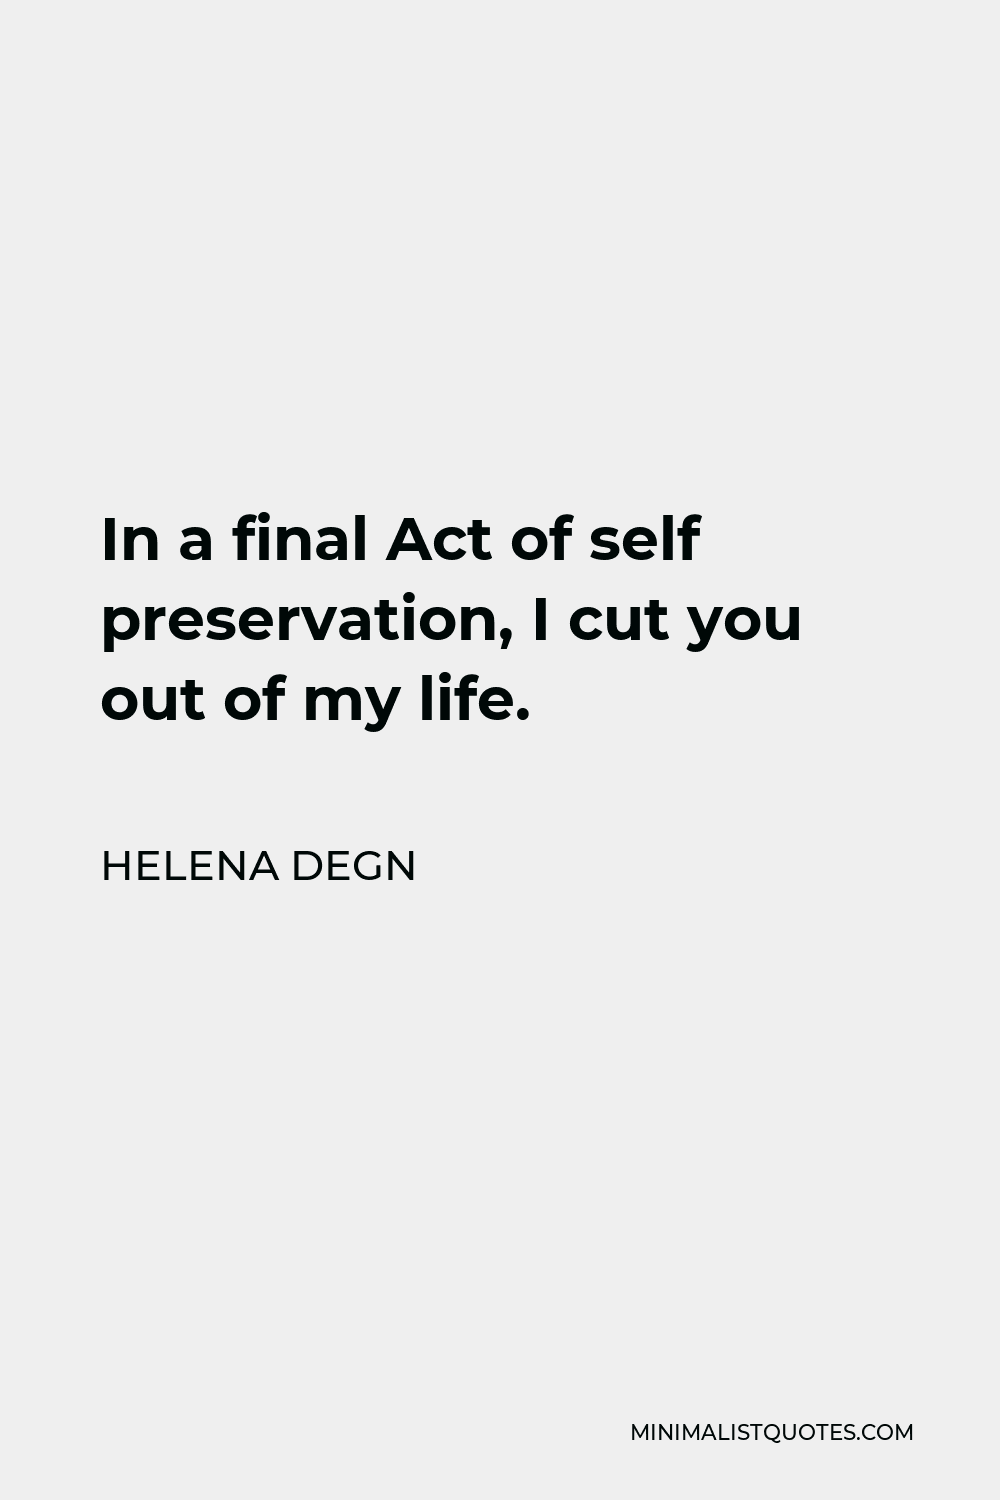 Helena Degn Quote - In a final Act of self preservation, I cut you out of my life.